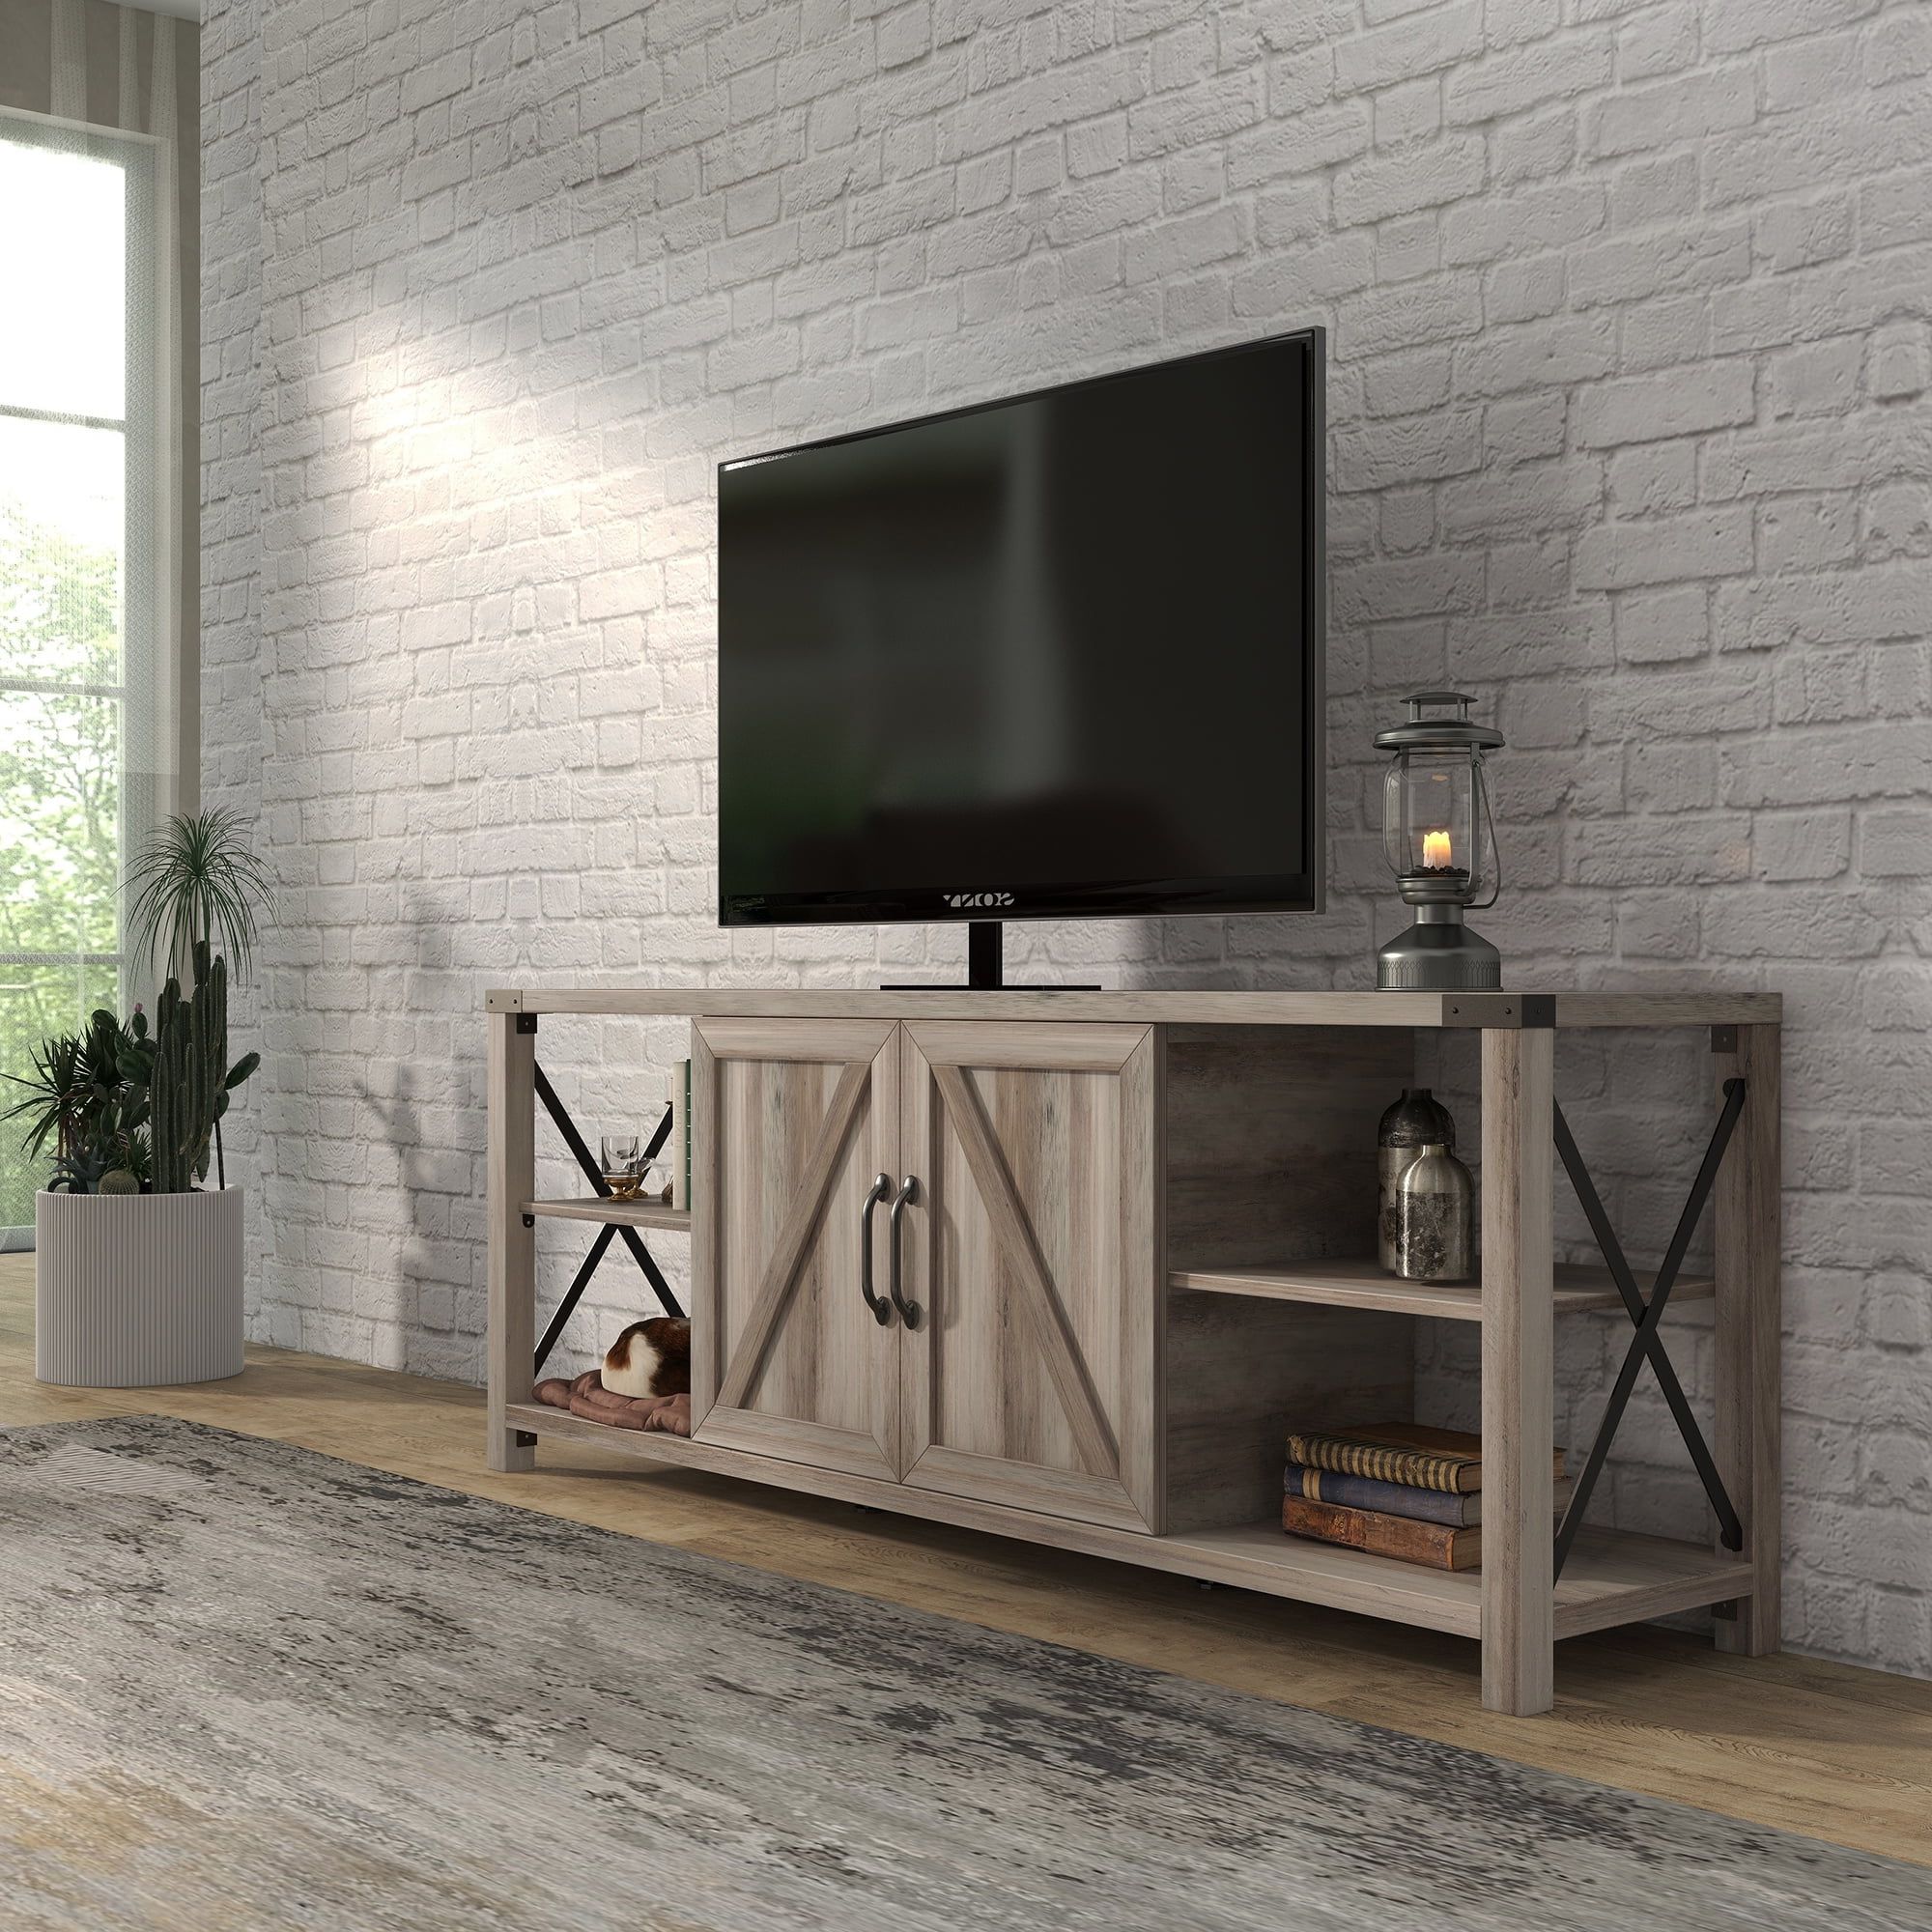 Newest Bestier Led Tv Stand For Tvs Up To 75 Entertainment Center For Living Throughout Bestier Tv Stand For Tvs Up To 75" (Photo 6 of 15)